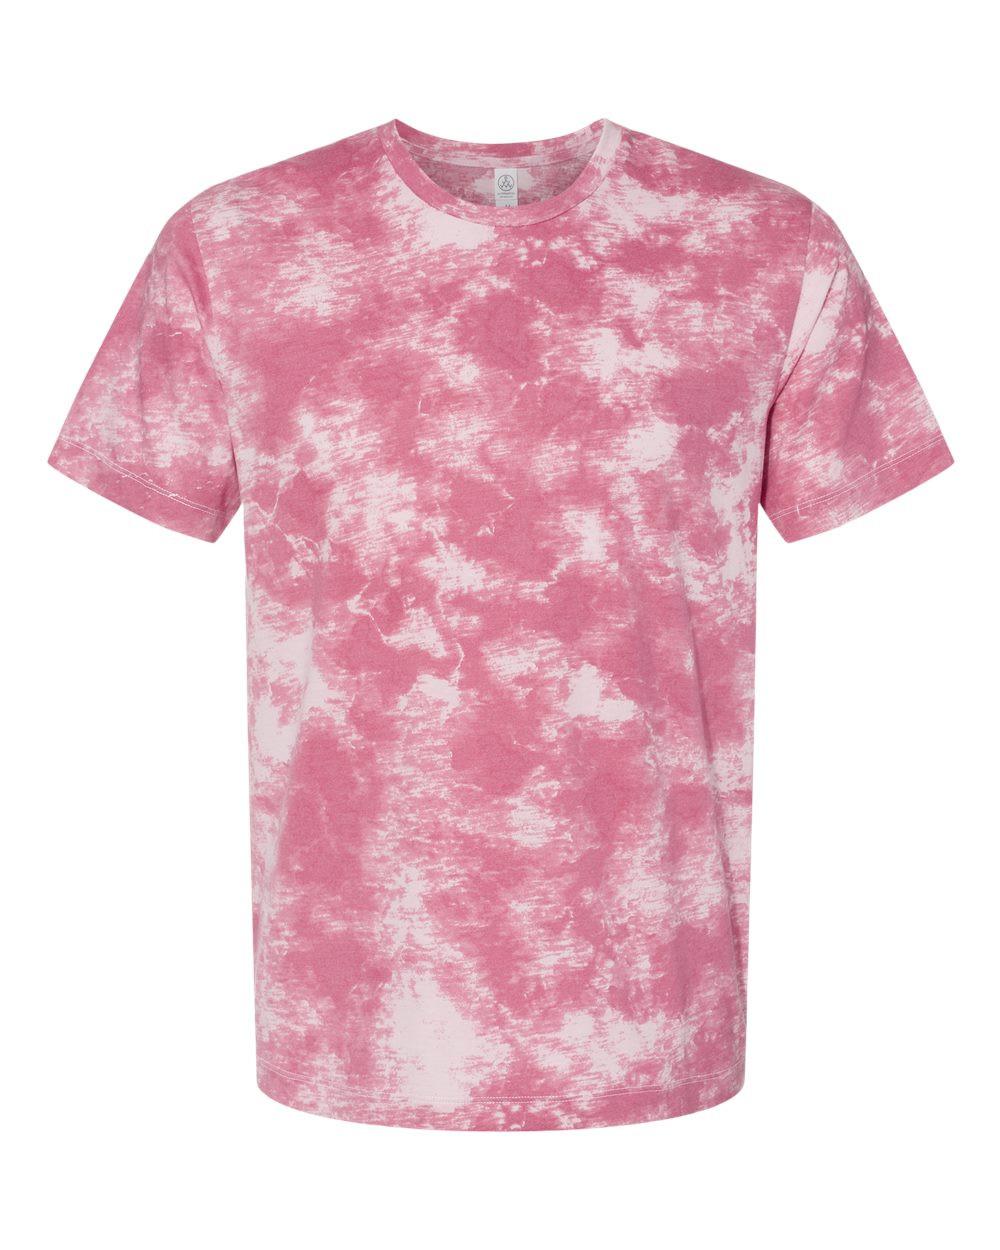 click to view Pink Tie Dye